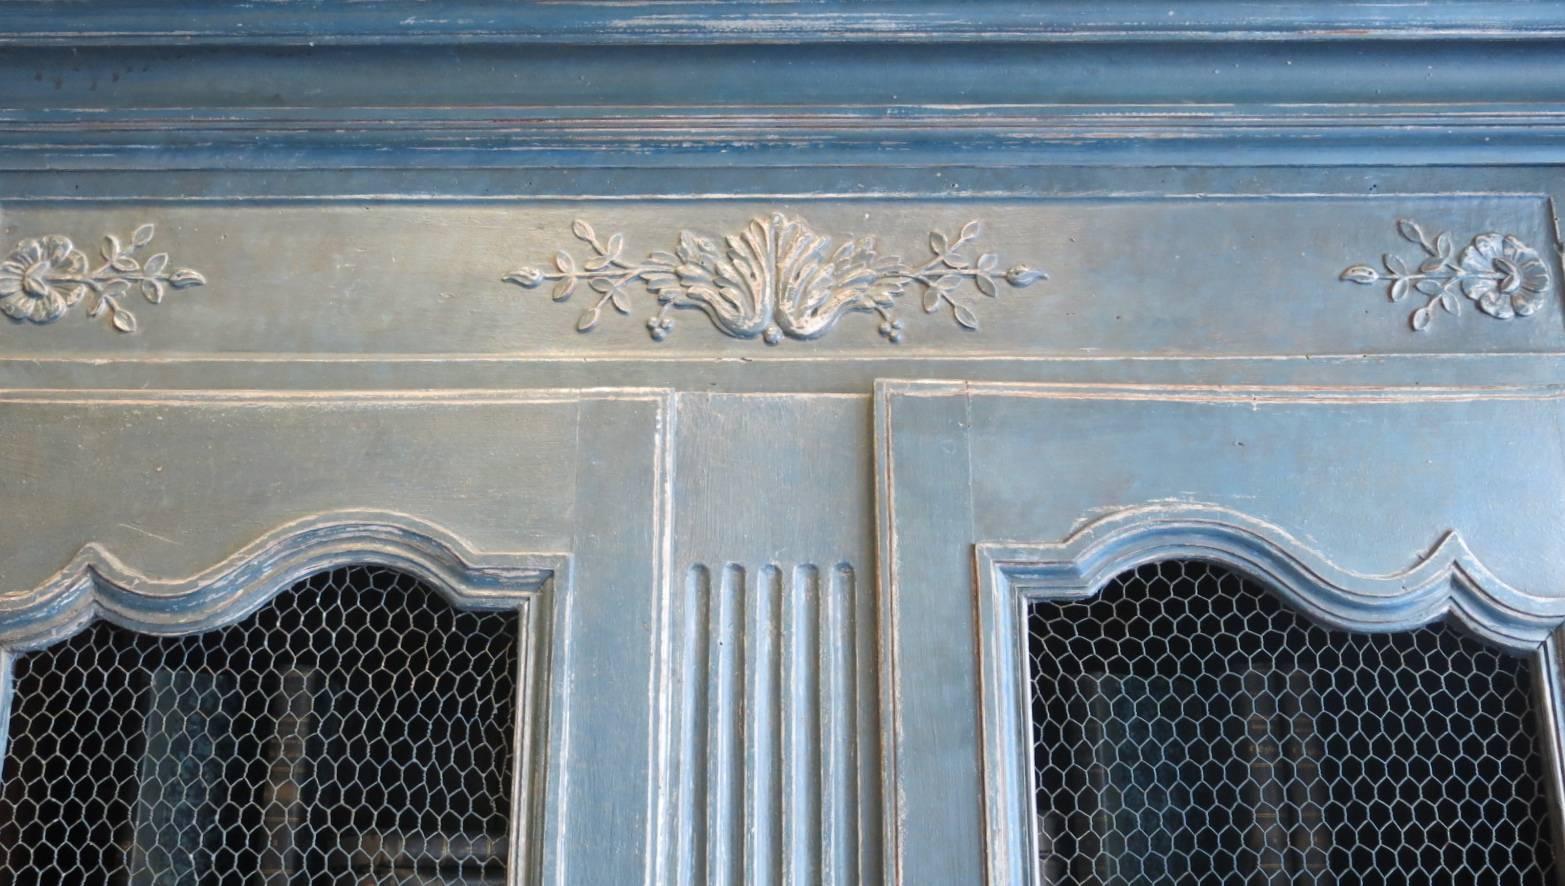 Most extremely rare antique French Louis XV Bibliothèque
end of the 18th century-beginning of 19th century.
Original pewter hardware
French paint in deep French blue
extremely rare detailed carvings
Provence.